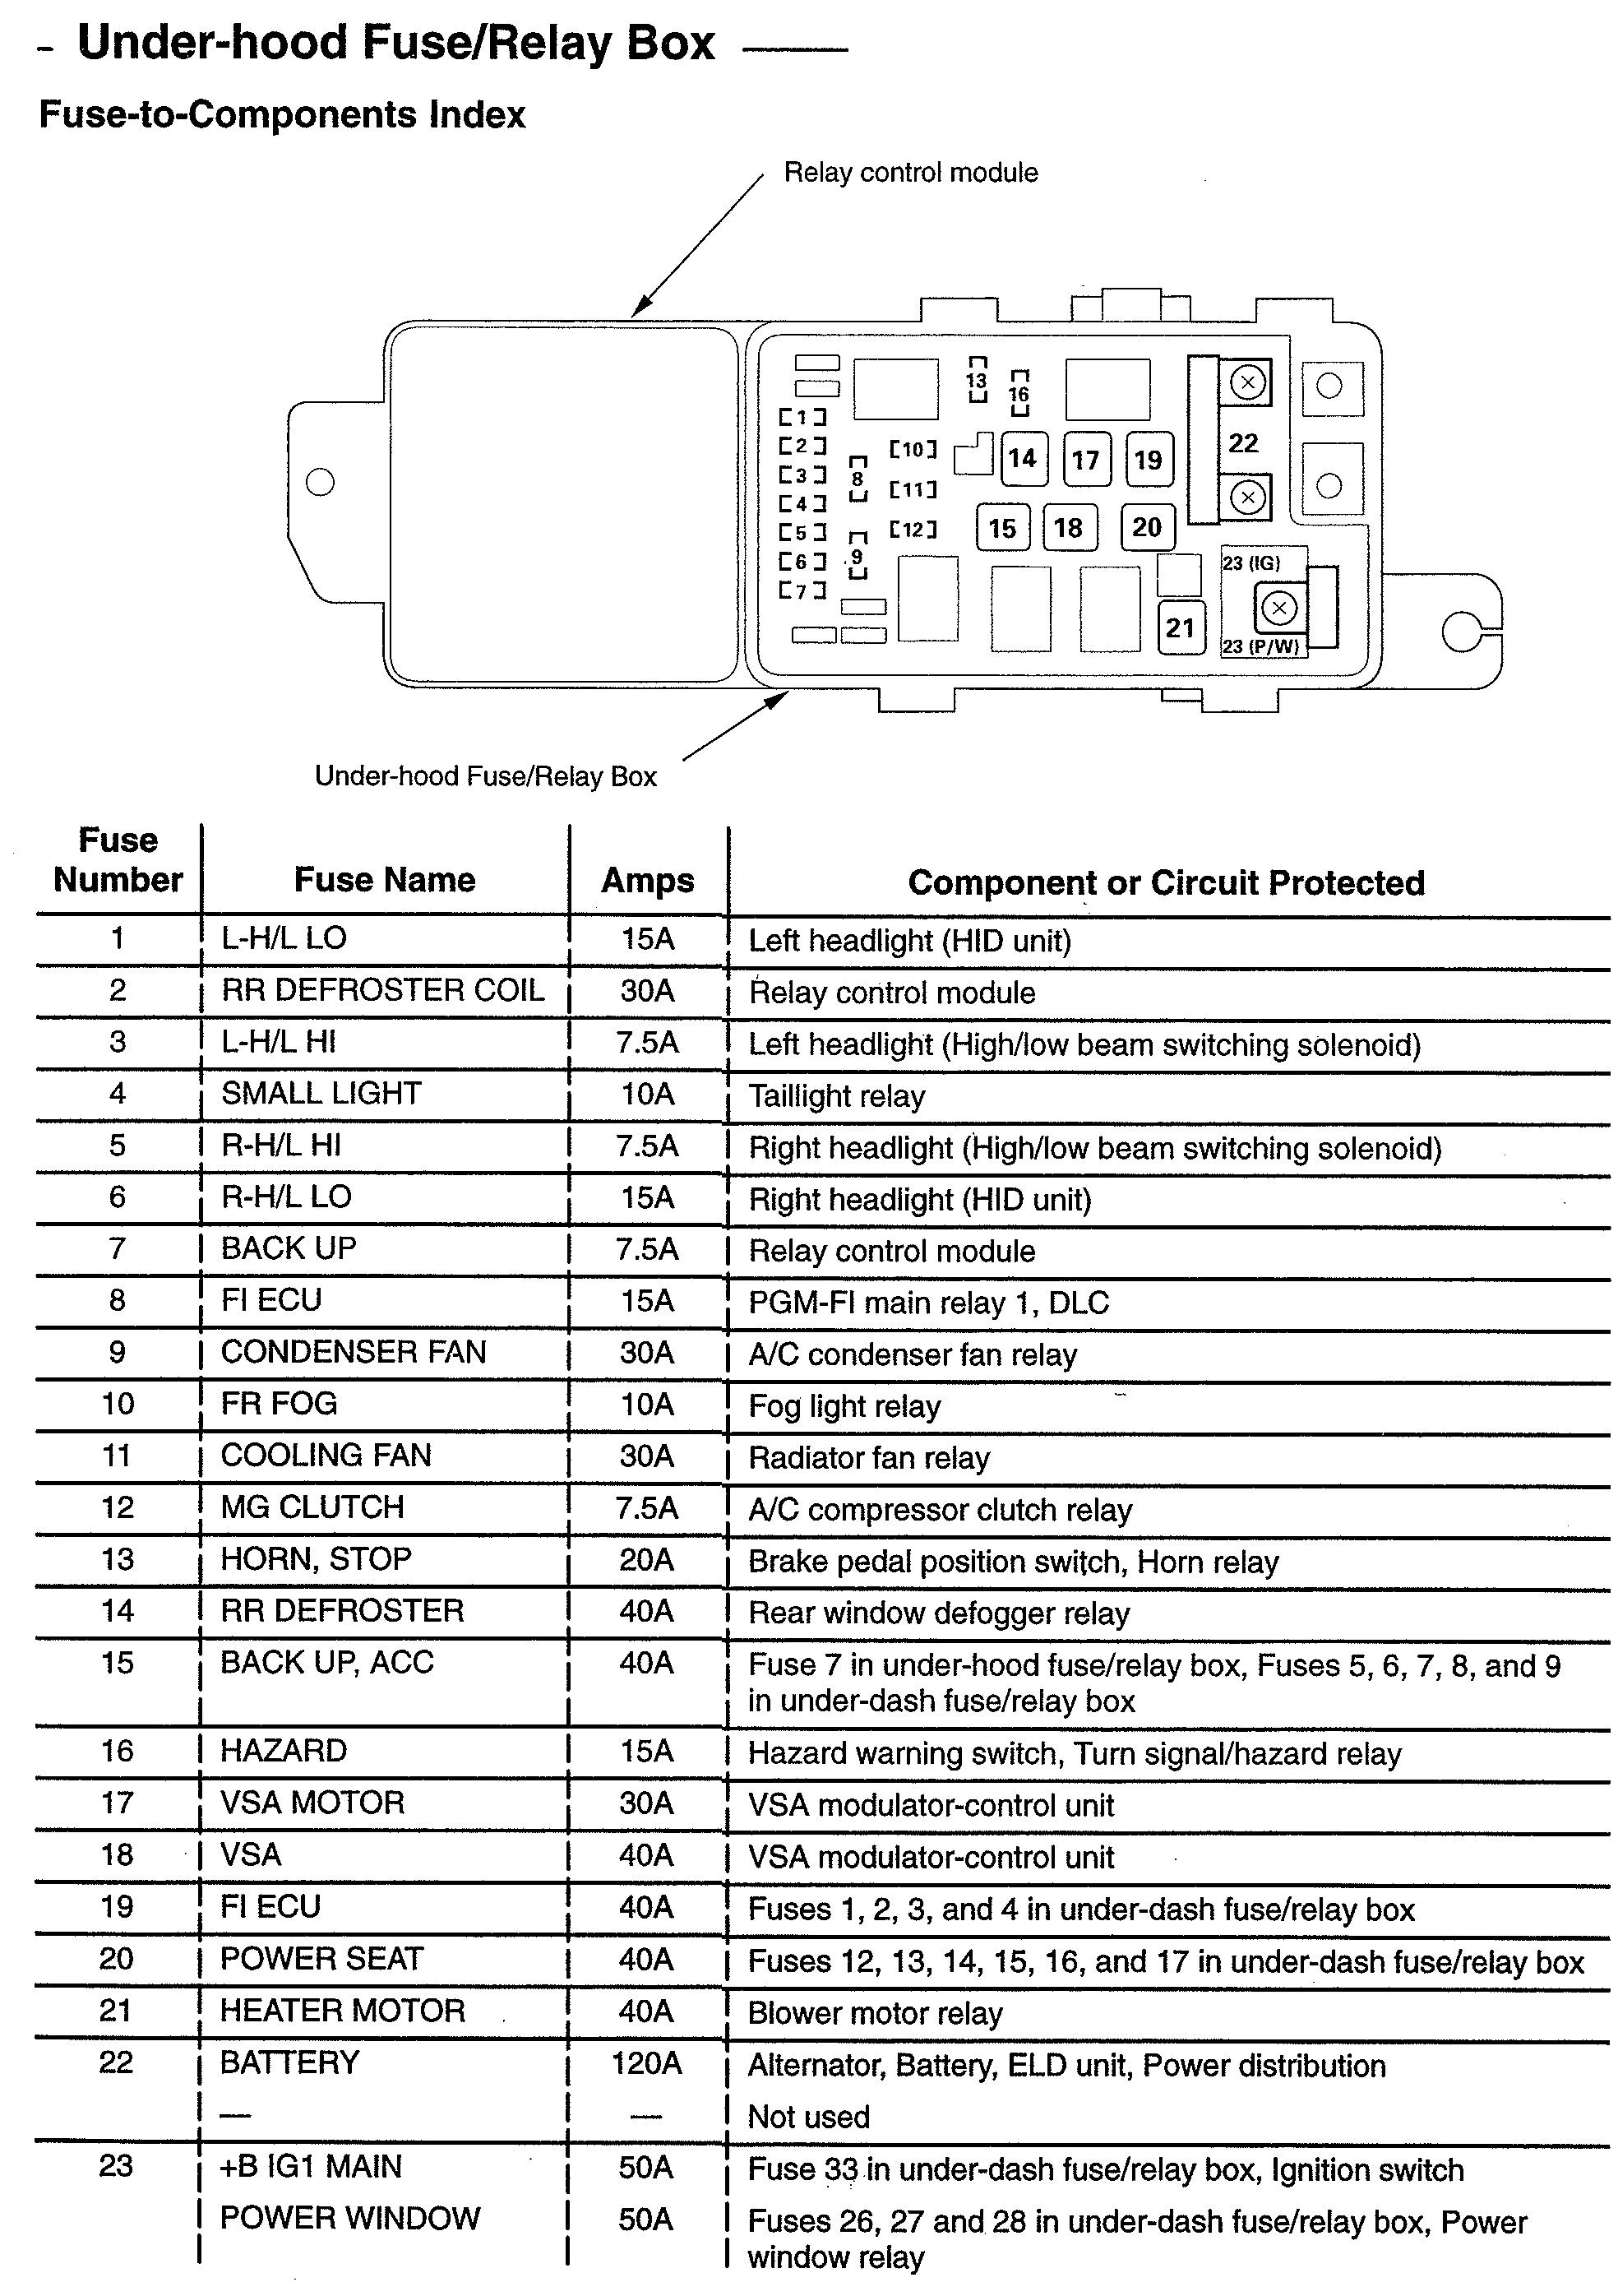 Fuse and Relay Diagram for 2000 Jaguar S-type 3.0 V6 Diagram] Jaguar S Type 2007 Wiring Diagram Full Version Hd Of Fuse and Relay Diagram for 2000 Jaguar S-type 3.0 V6